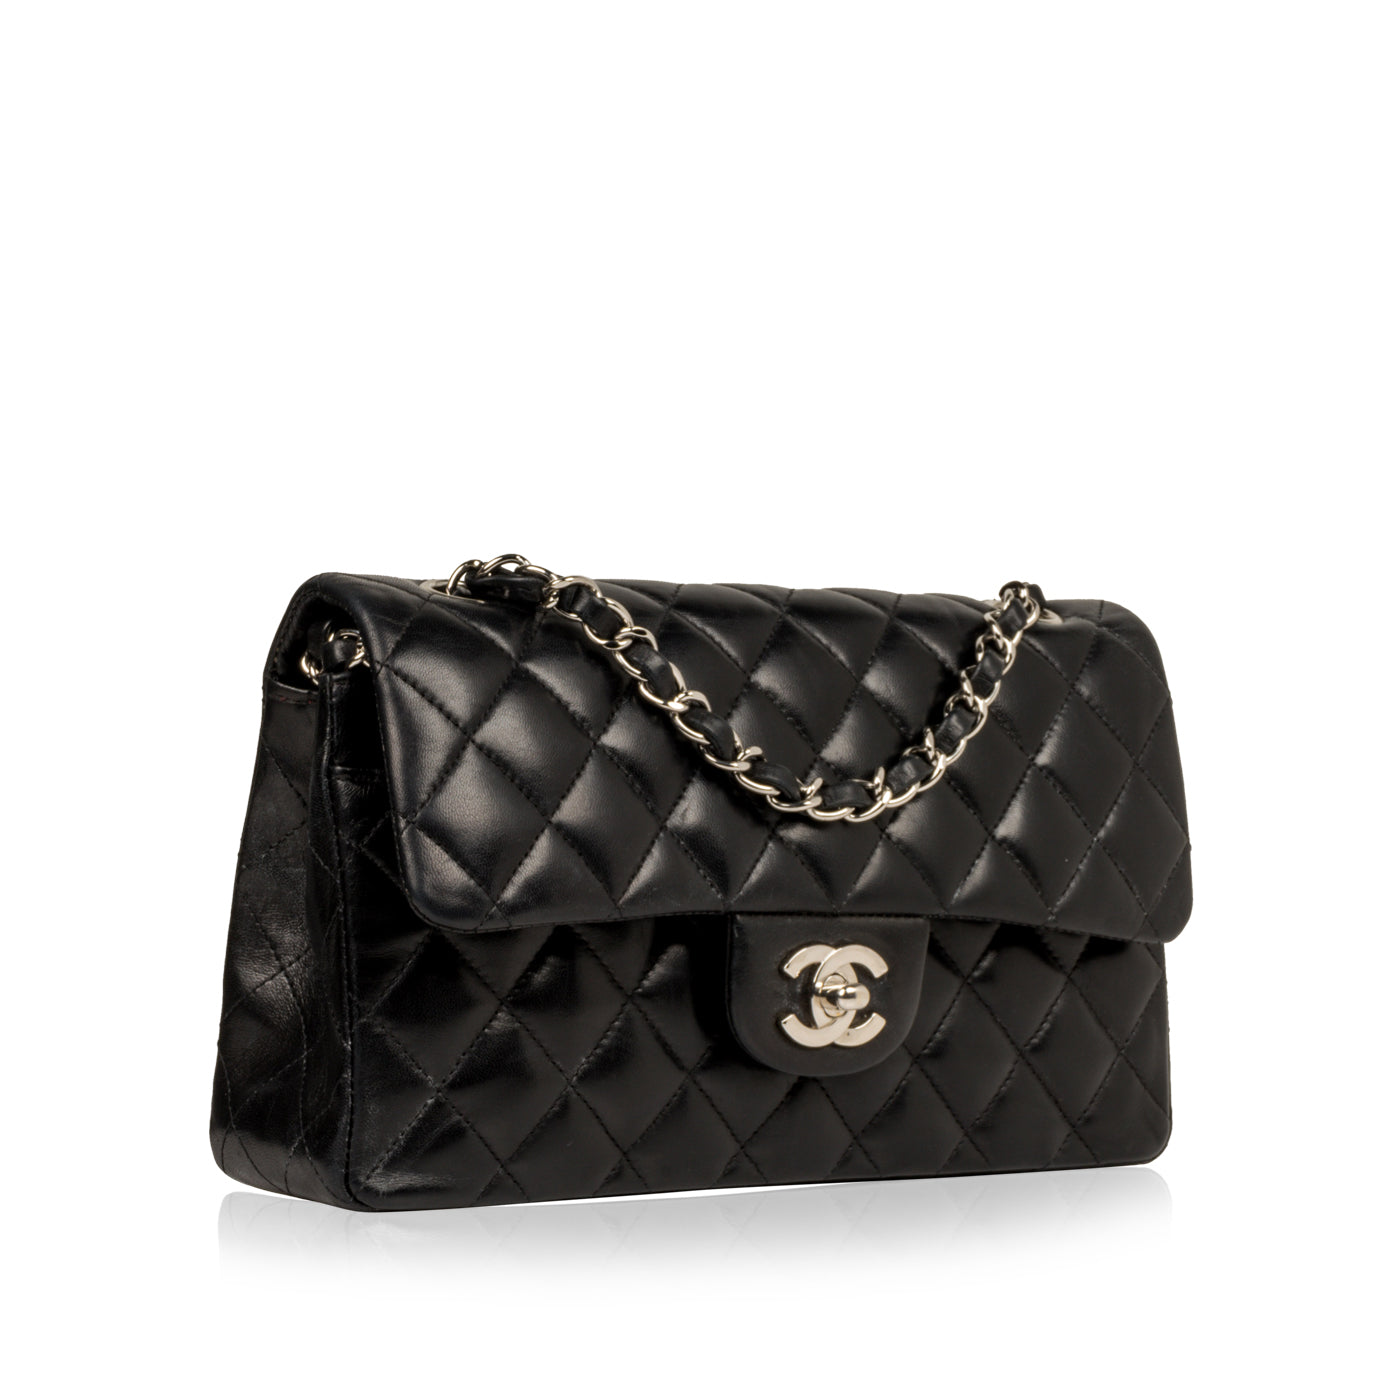 Chanel quilted leather big CC buckle chain flap bag small black | Chanel  bag, Bags, Chanel